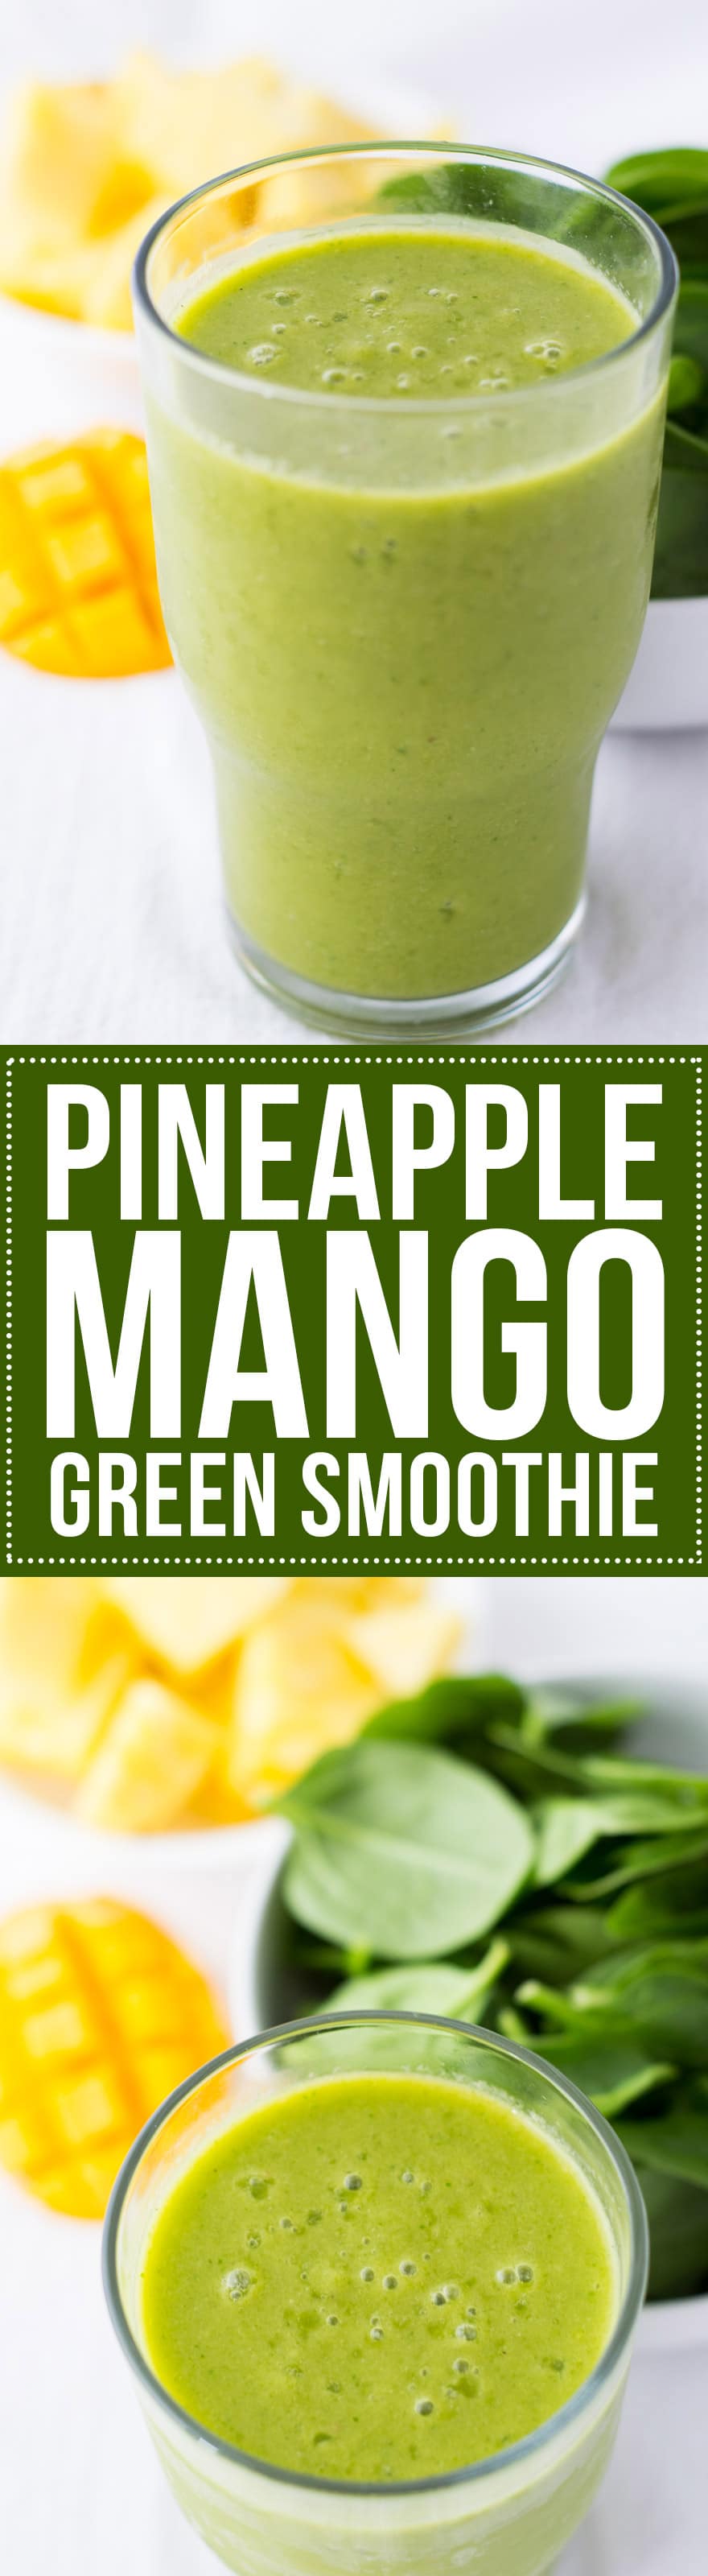 This Pineapple Mango Green Smoothie is perfect for people who are new to green smoothies. You only taste tropical flavor, not the spinach! Dairy and gluten-free.